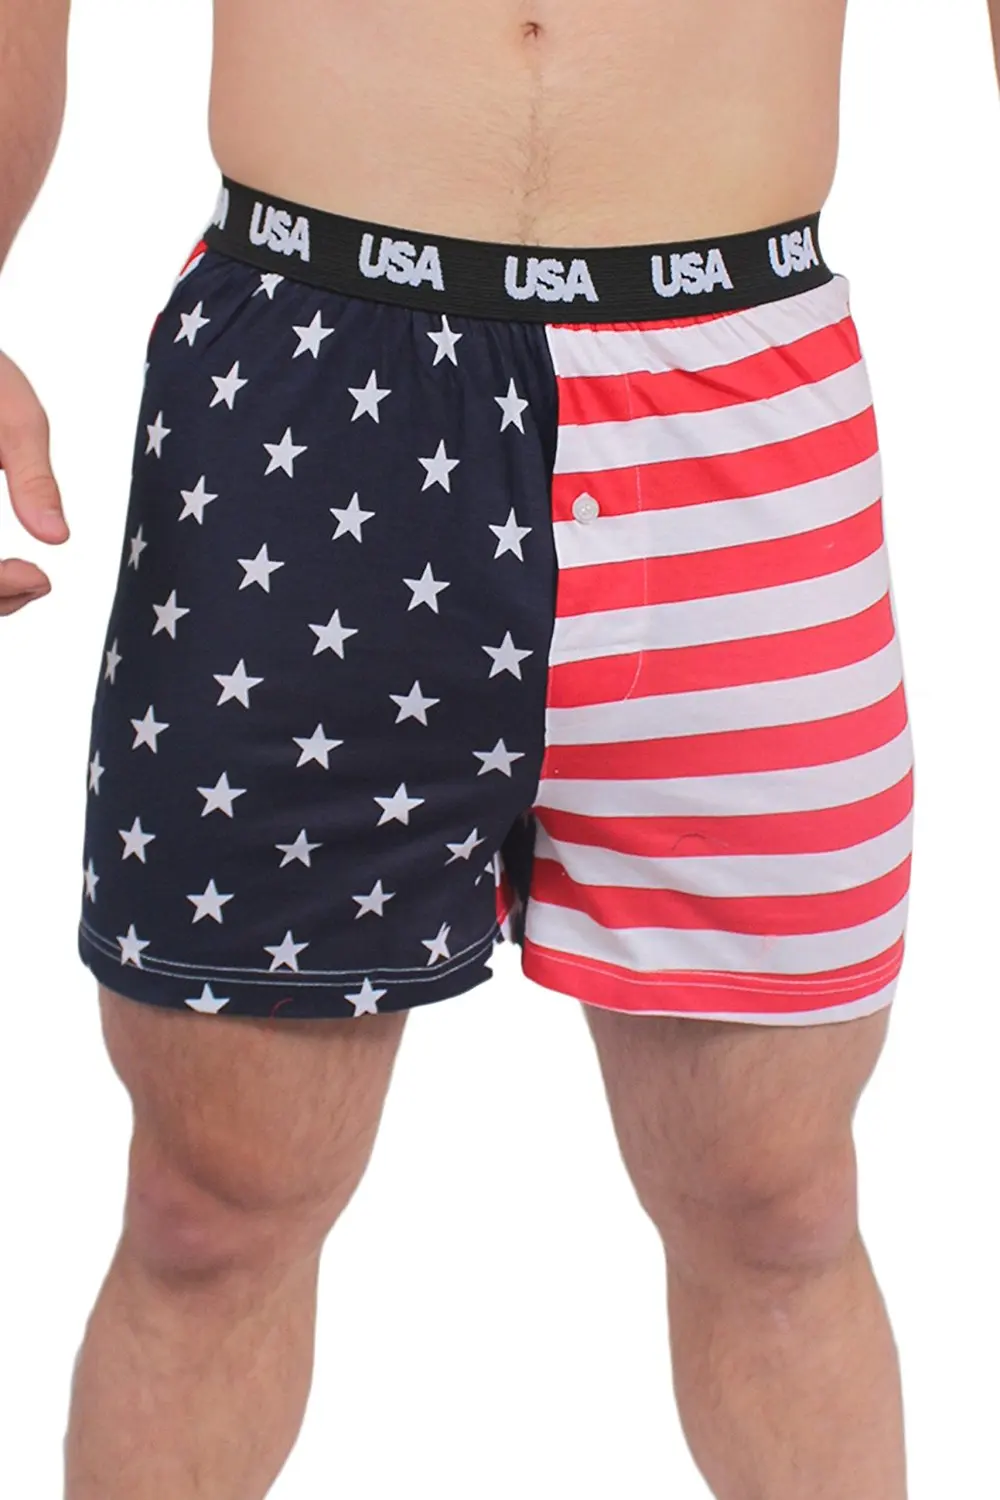 Cheap Boxers Usa, find Boxers Usa deals on line at Alibaba.com